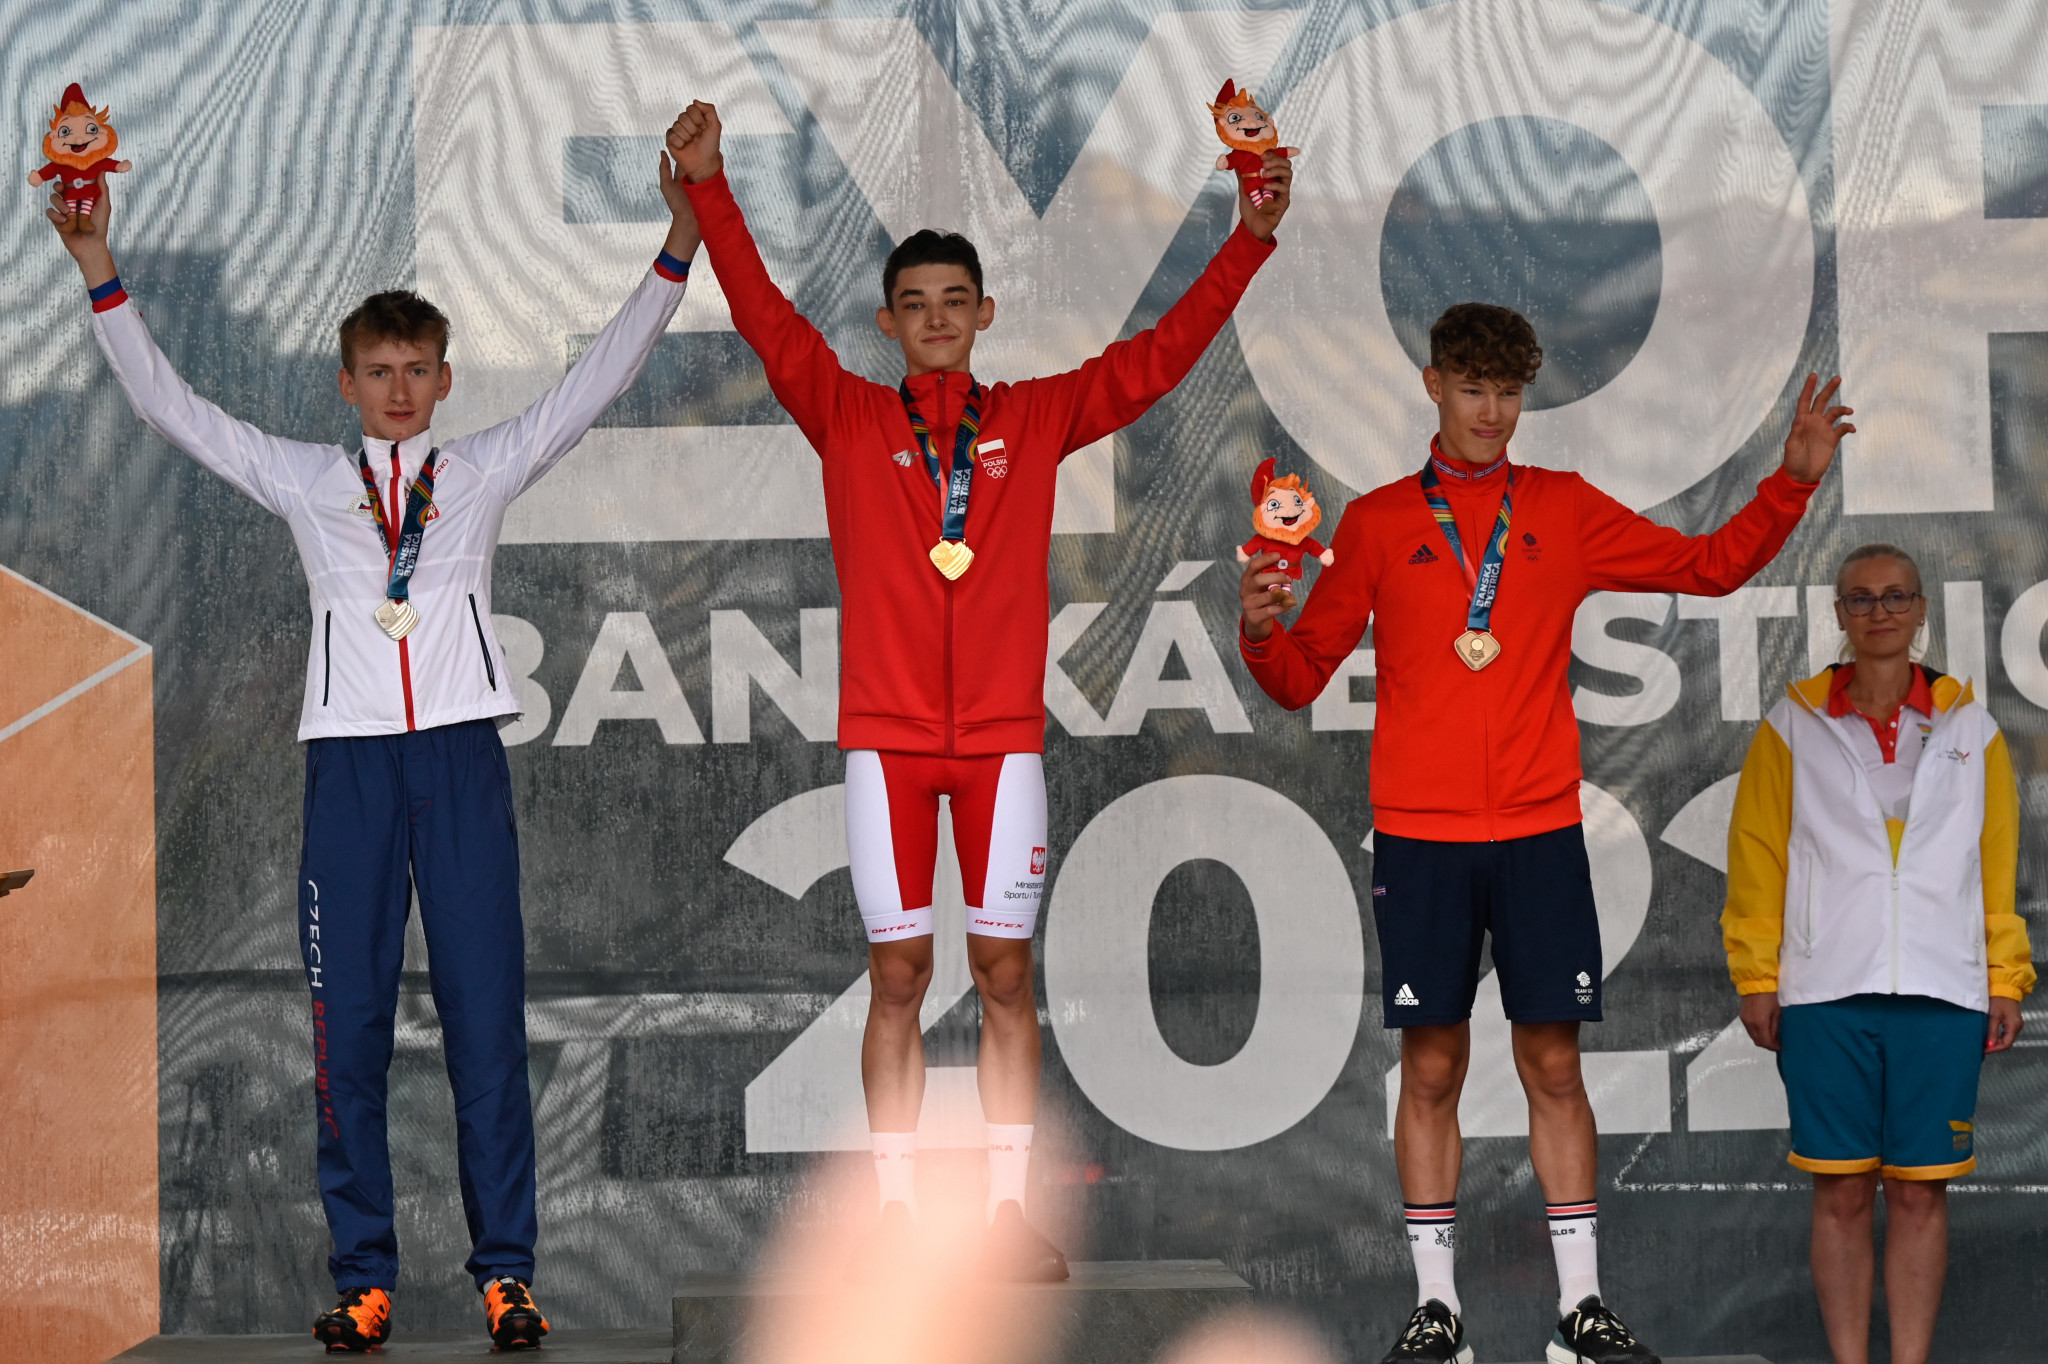 Patyk Goszczurny, centre, won the boys' cycling time trial at a canter with 8.59secs between him and second place ©EYOF Banská Bystrica 2022